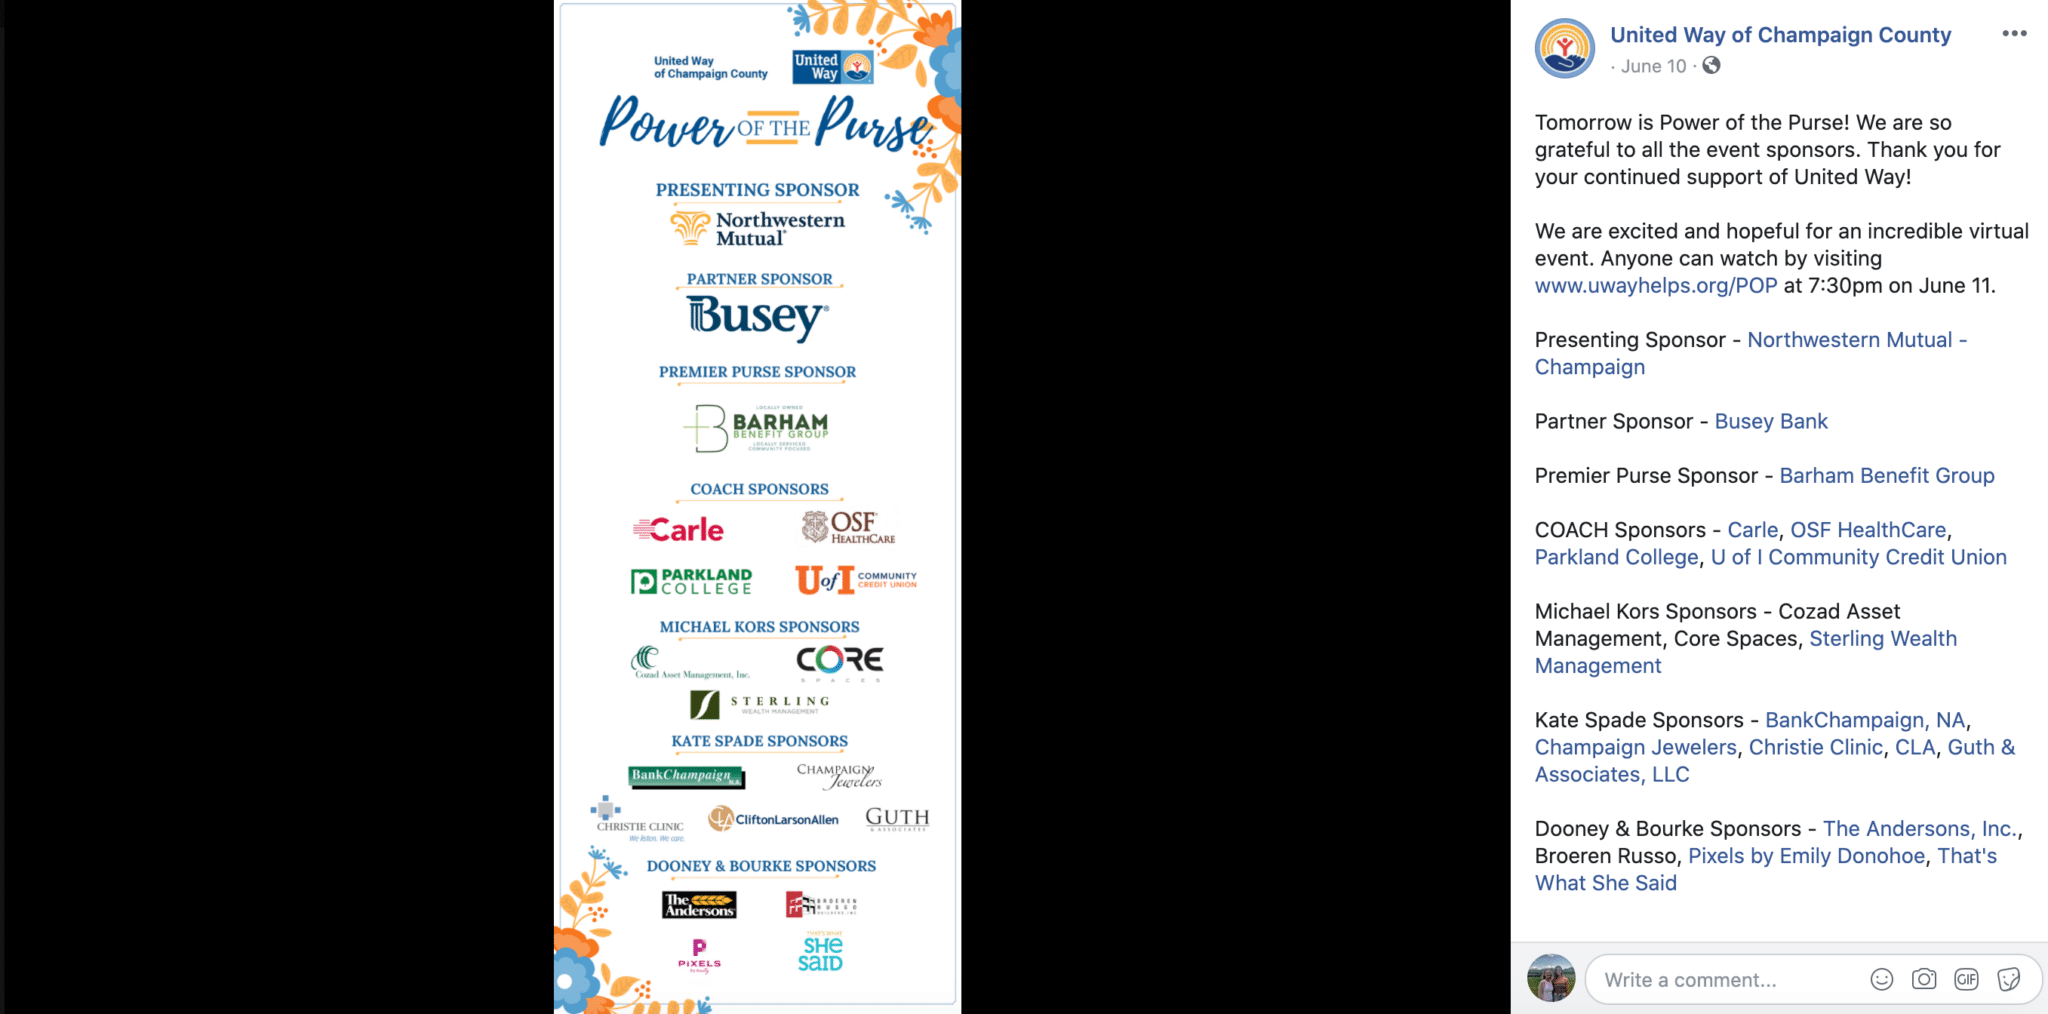 United-Way-of-Champaign-County-Power-of-the-Purse-Sponsors